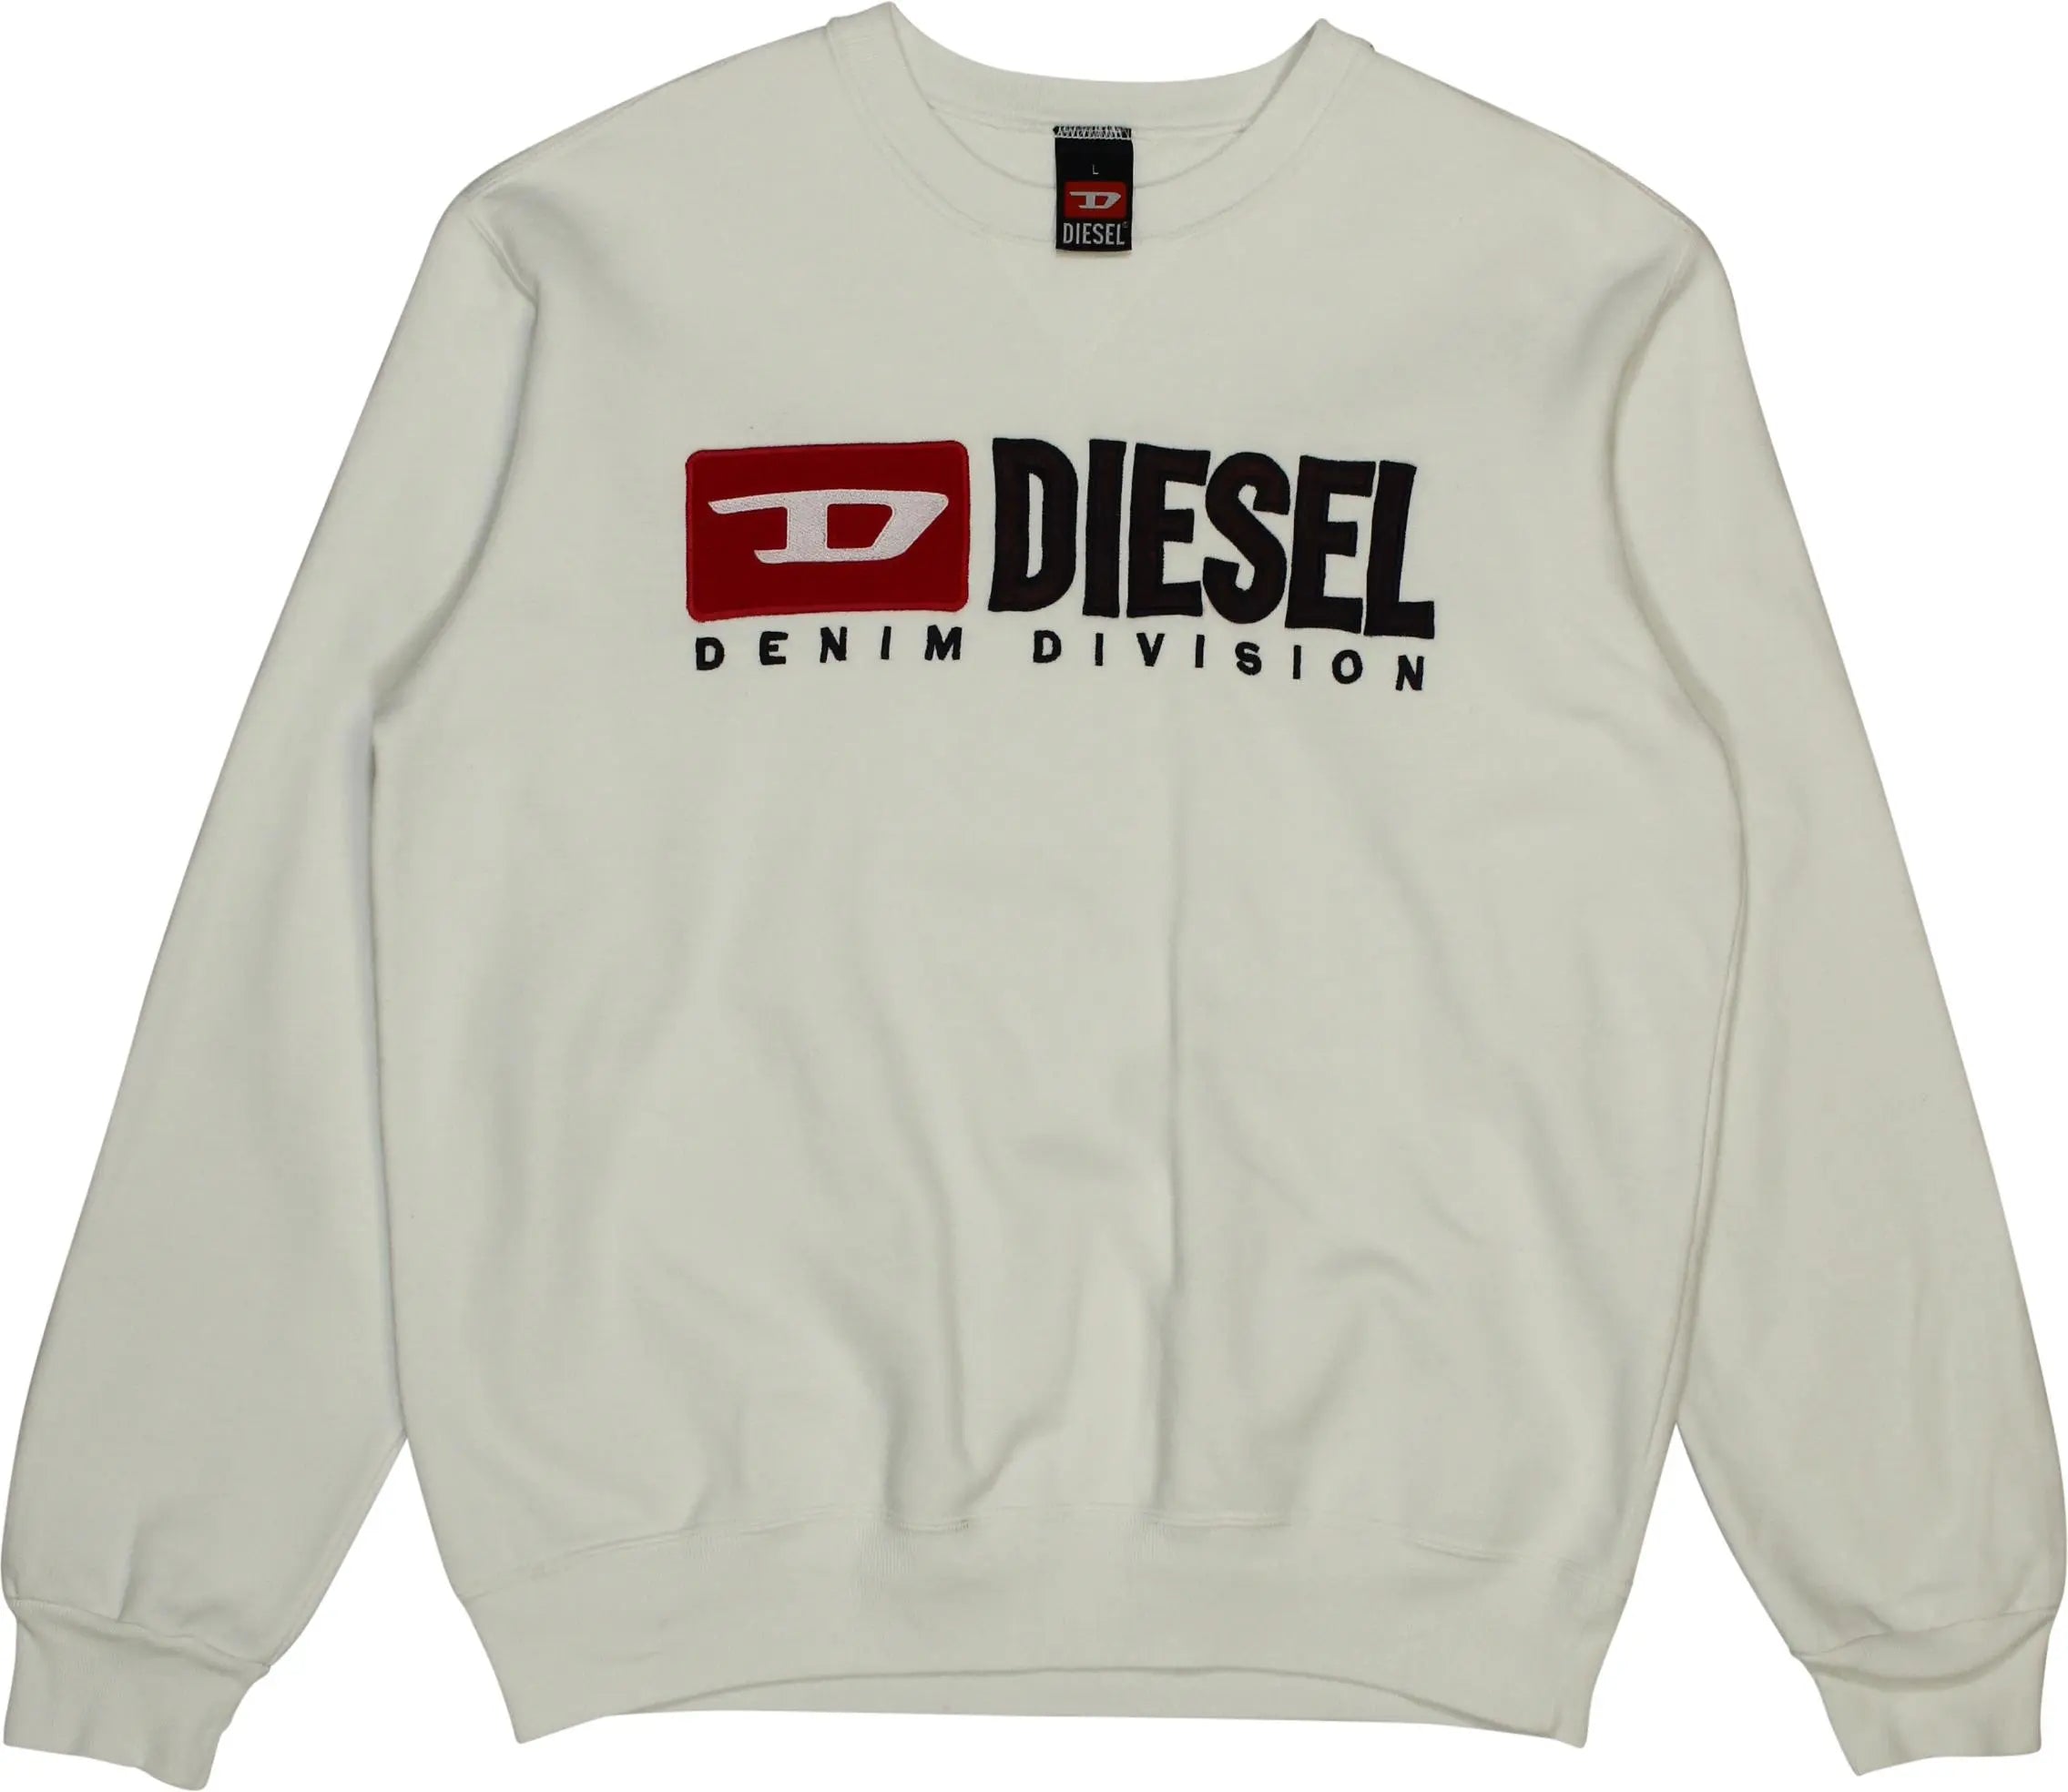 Diesel - White Sweater by Diesel- ThriftTale.com - Vintage and second handclothing